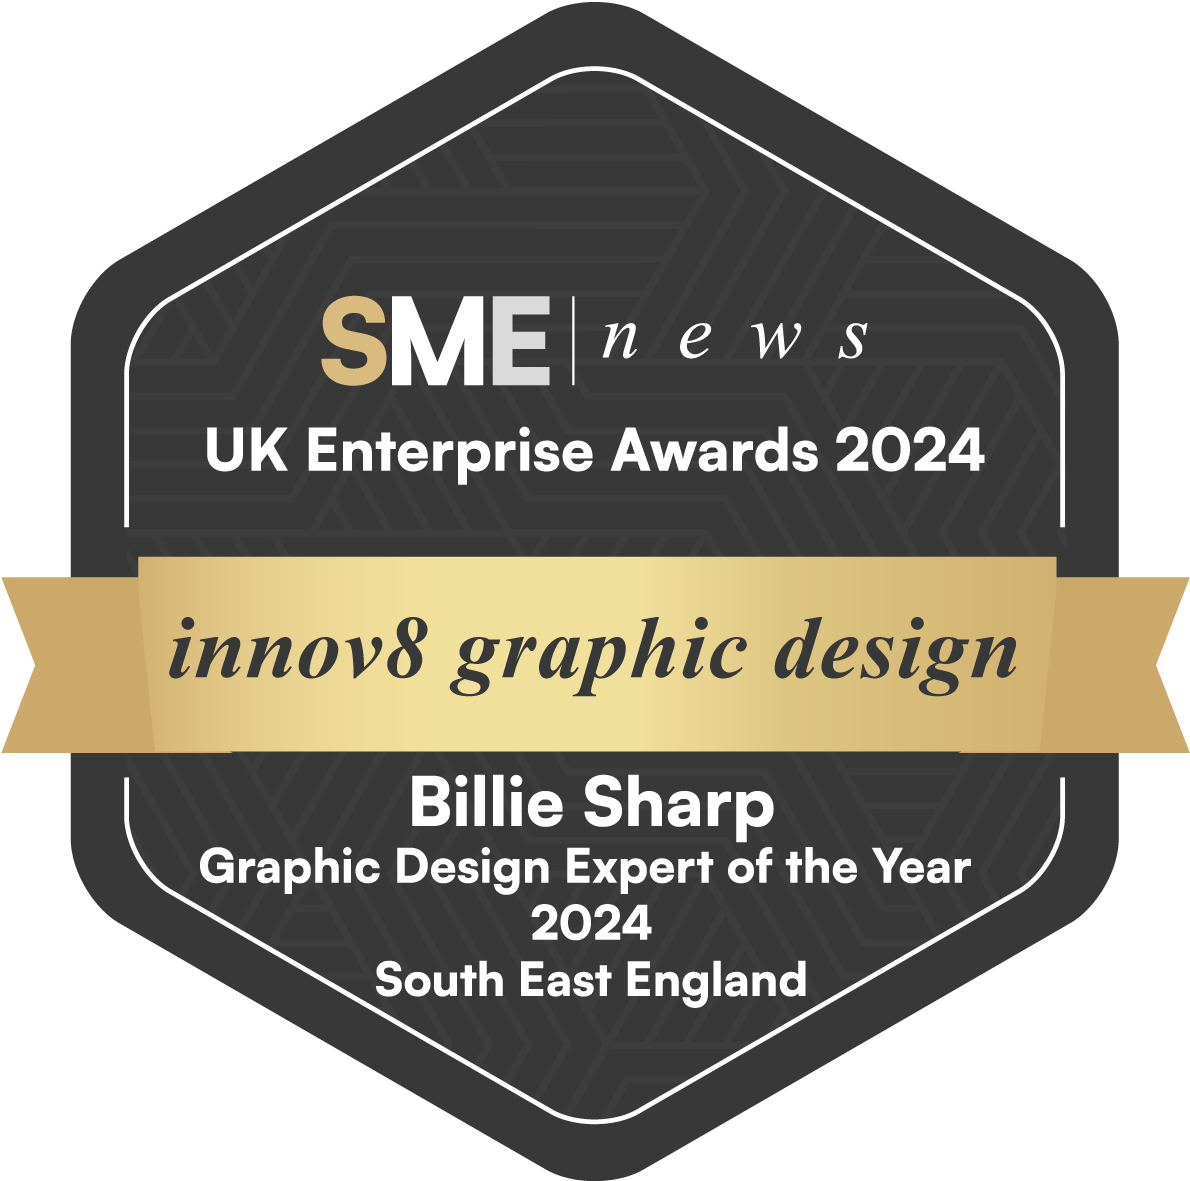 I am delighted to have been awarded Graphic Design Expert of the Year for the second year in a row and across the South East of England too!